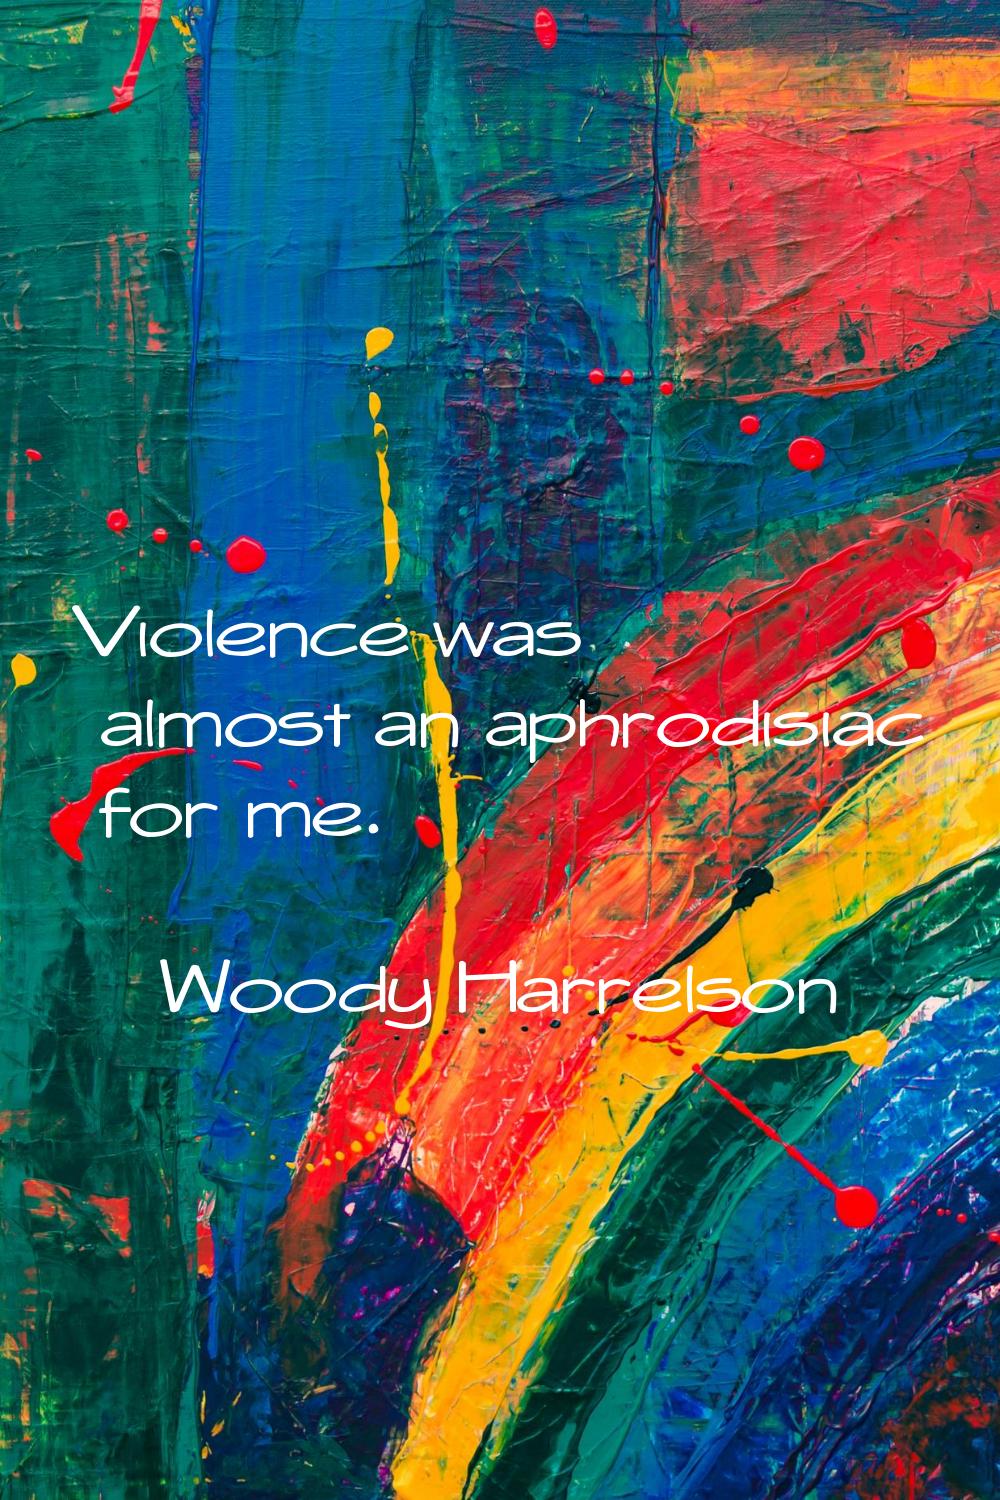 Violence was almost an aphrodisiac for me.